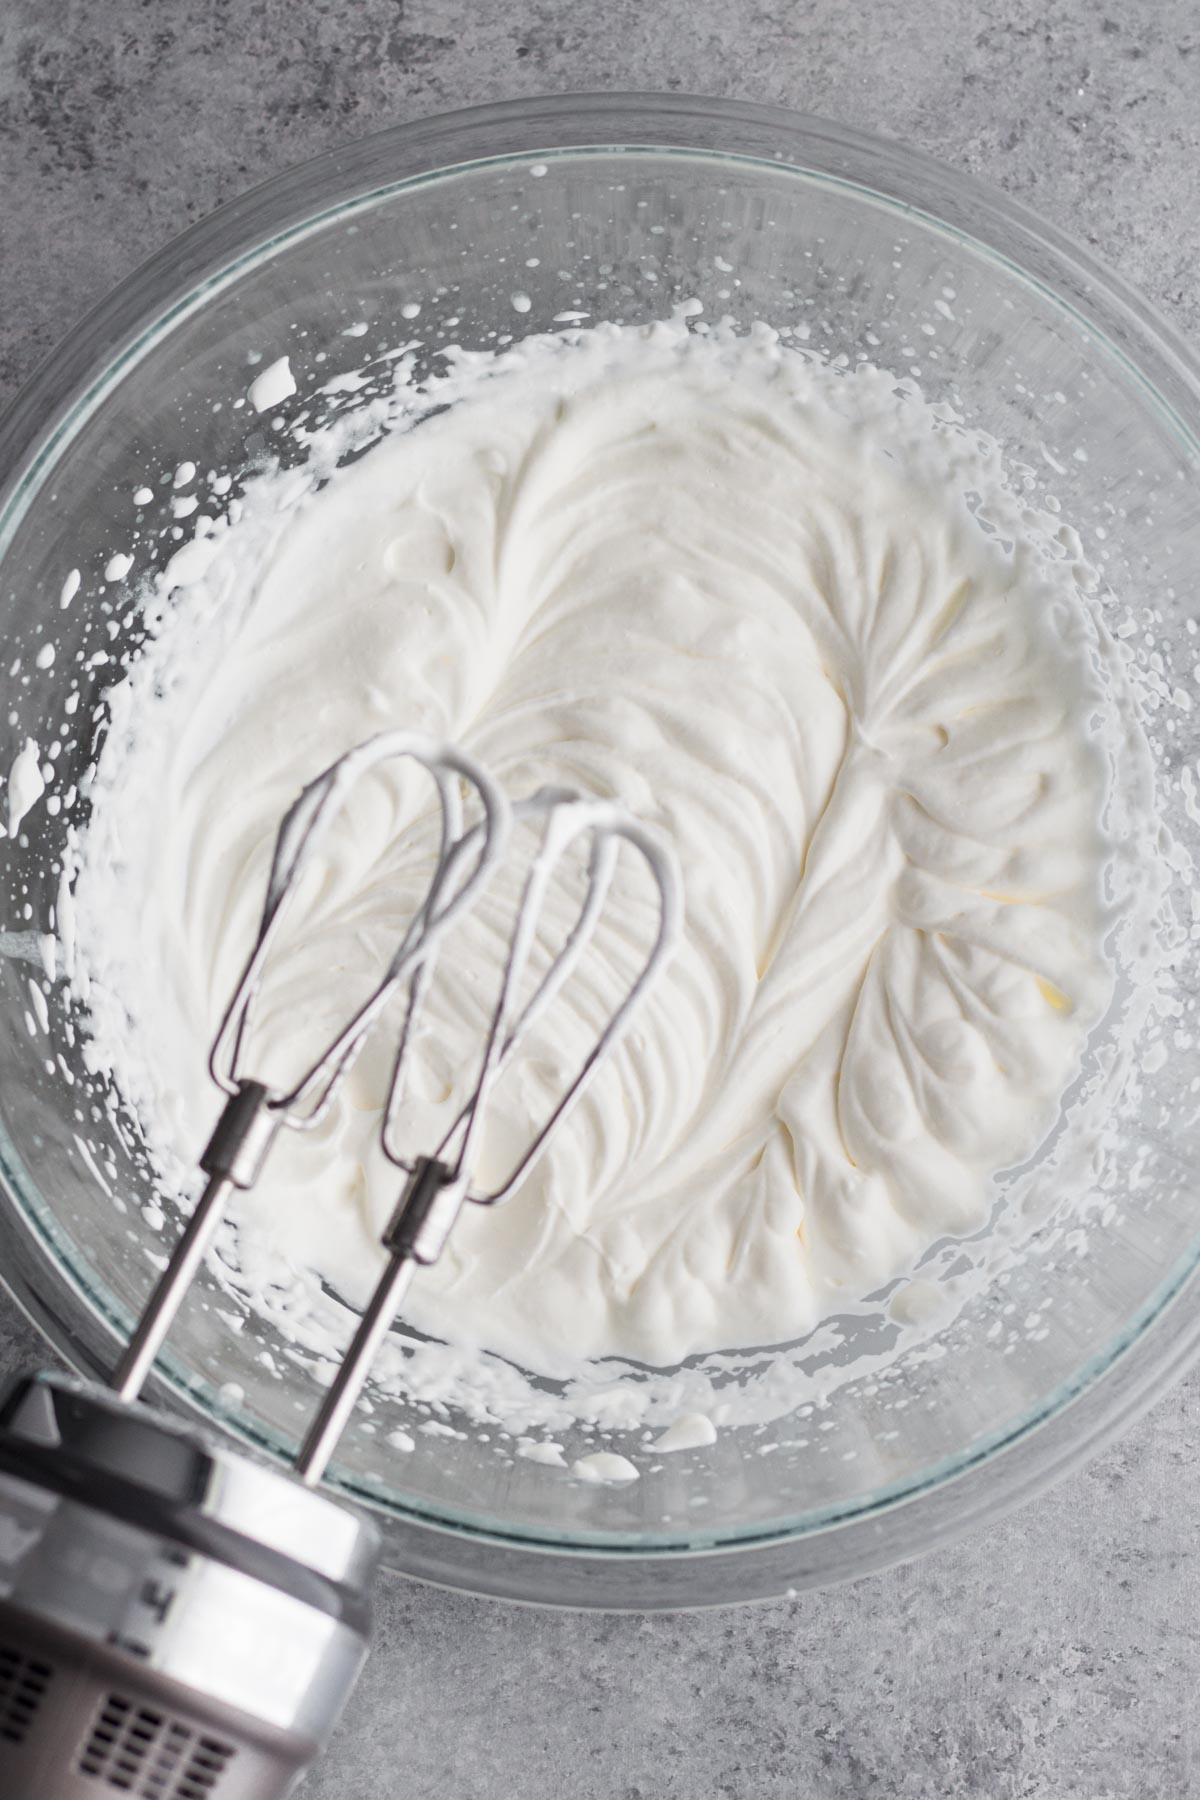 Overhead view of whipped cream in a glass bowl with an electric hand mixer.